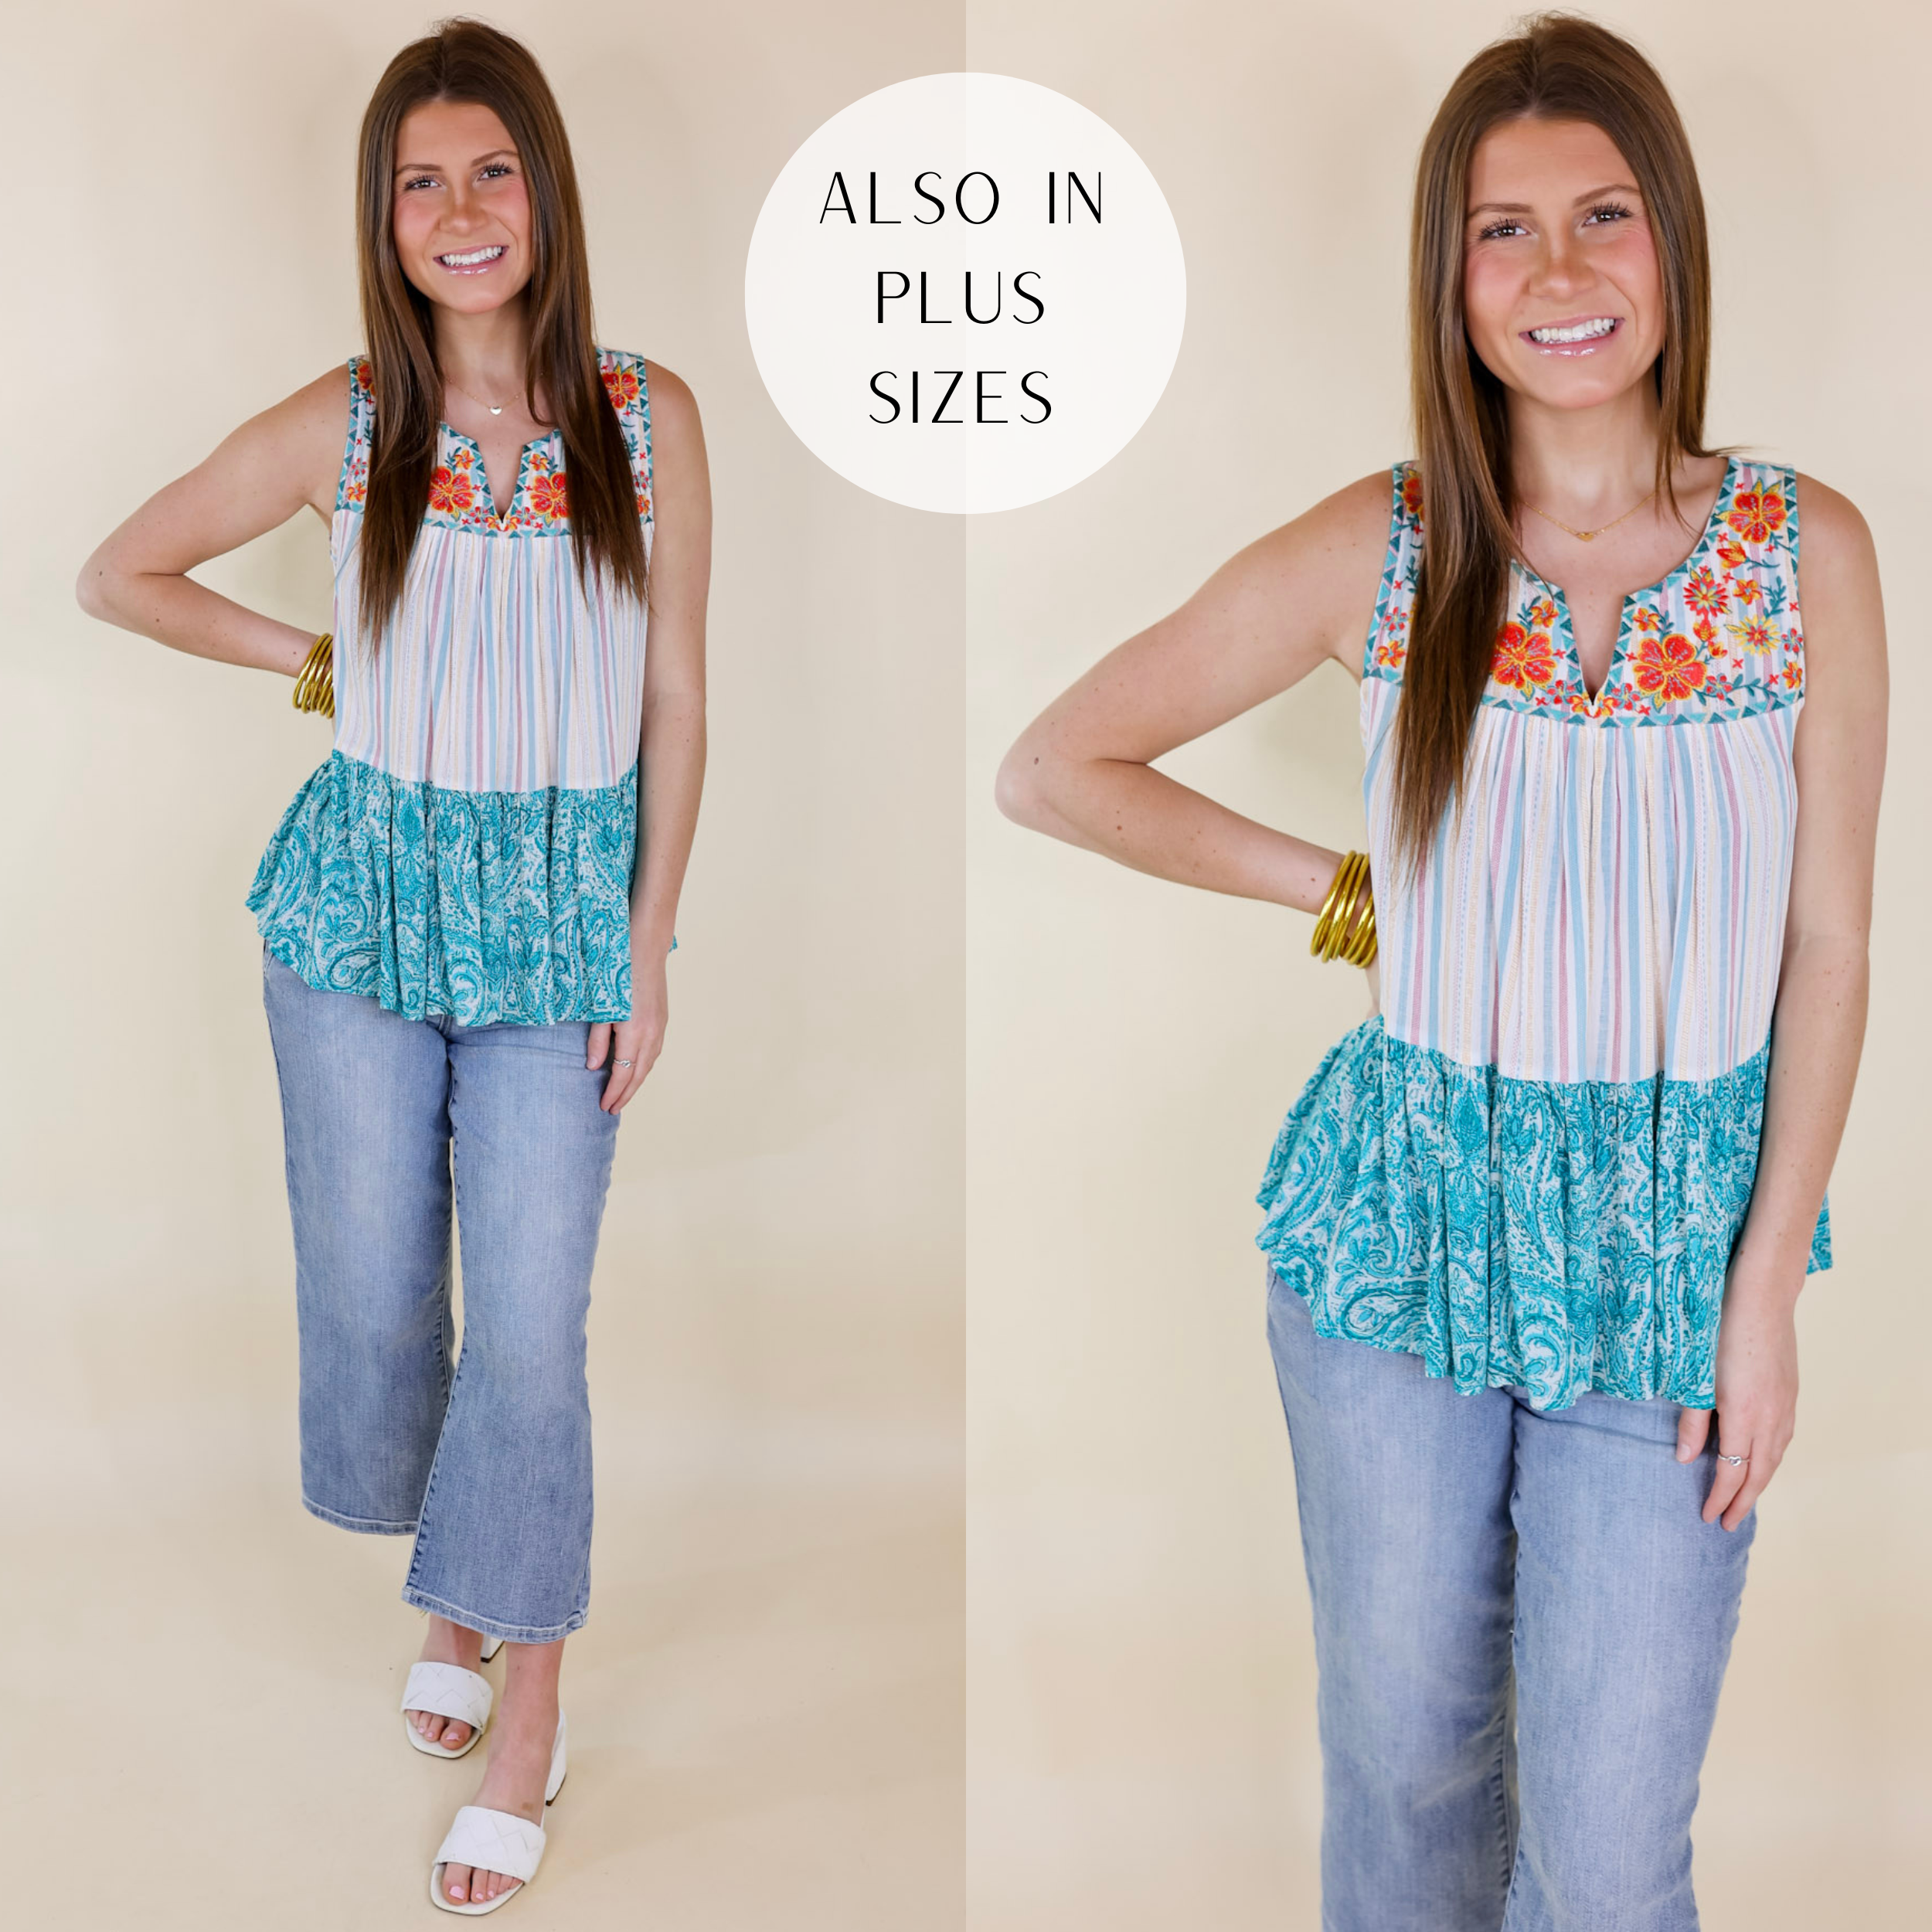 Model is wearing a tank top with a notched neckline, floral embroidery, and a striped and paisley print body. Model has it paired with gold jewelry, cropped jeans, and ivory heels.